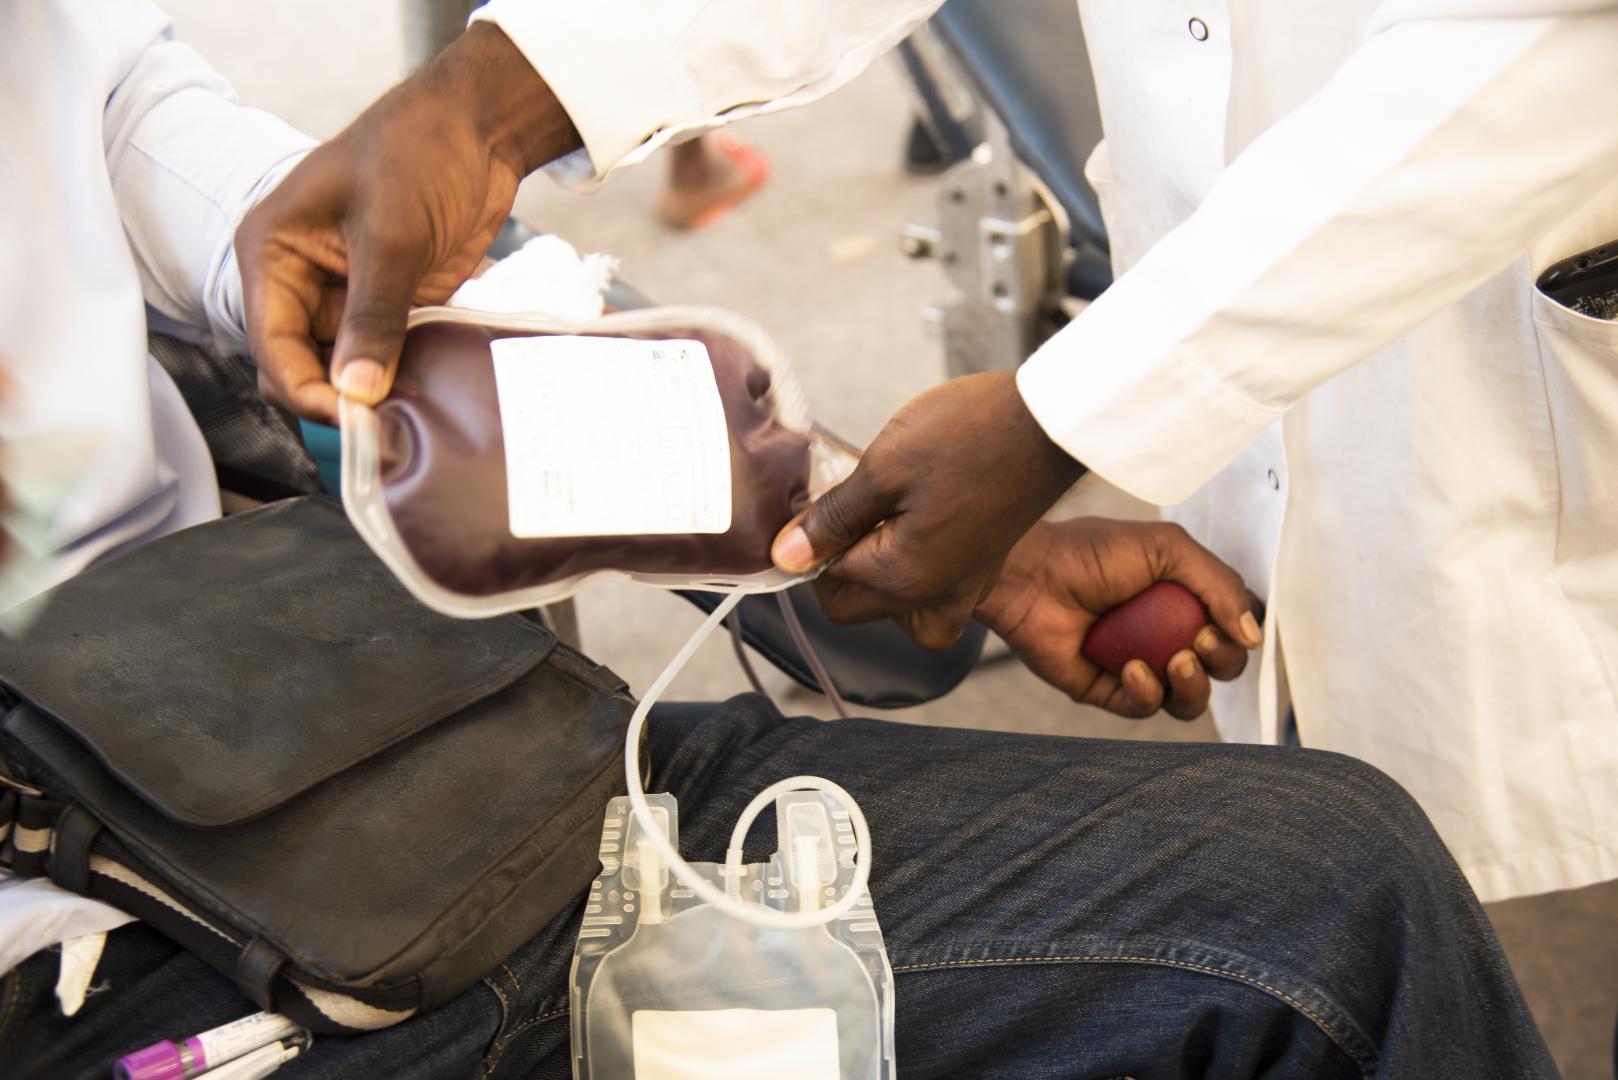 transform African blood donations